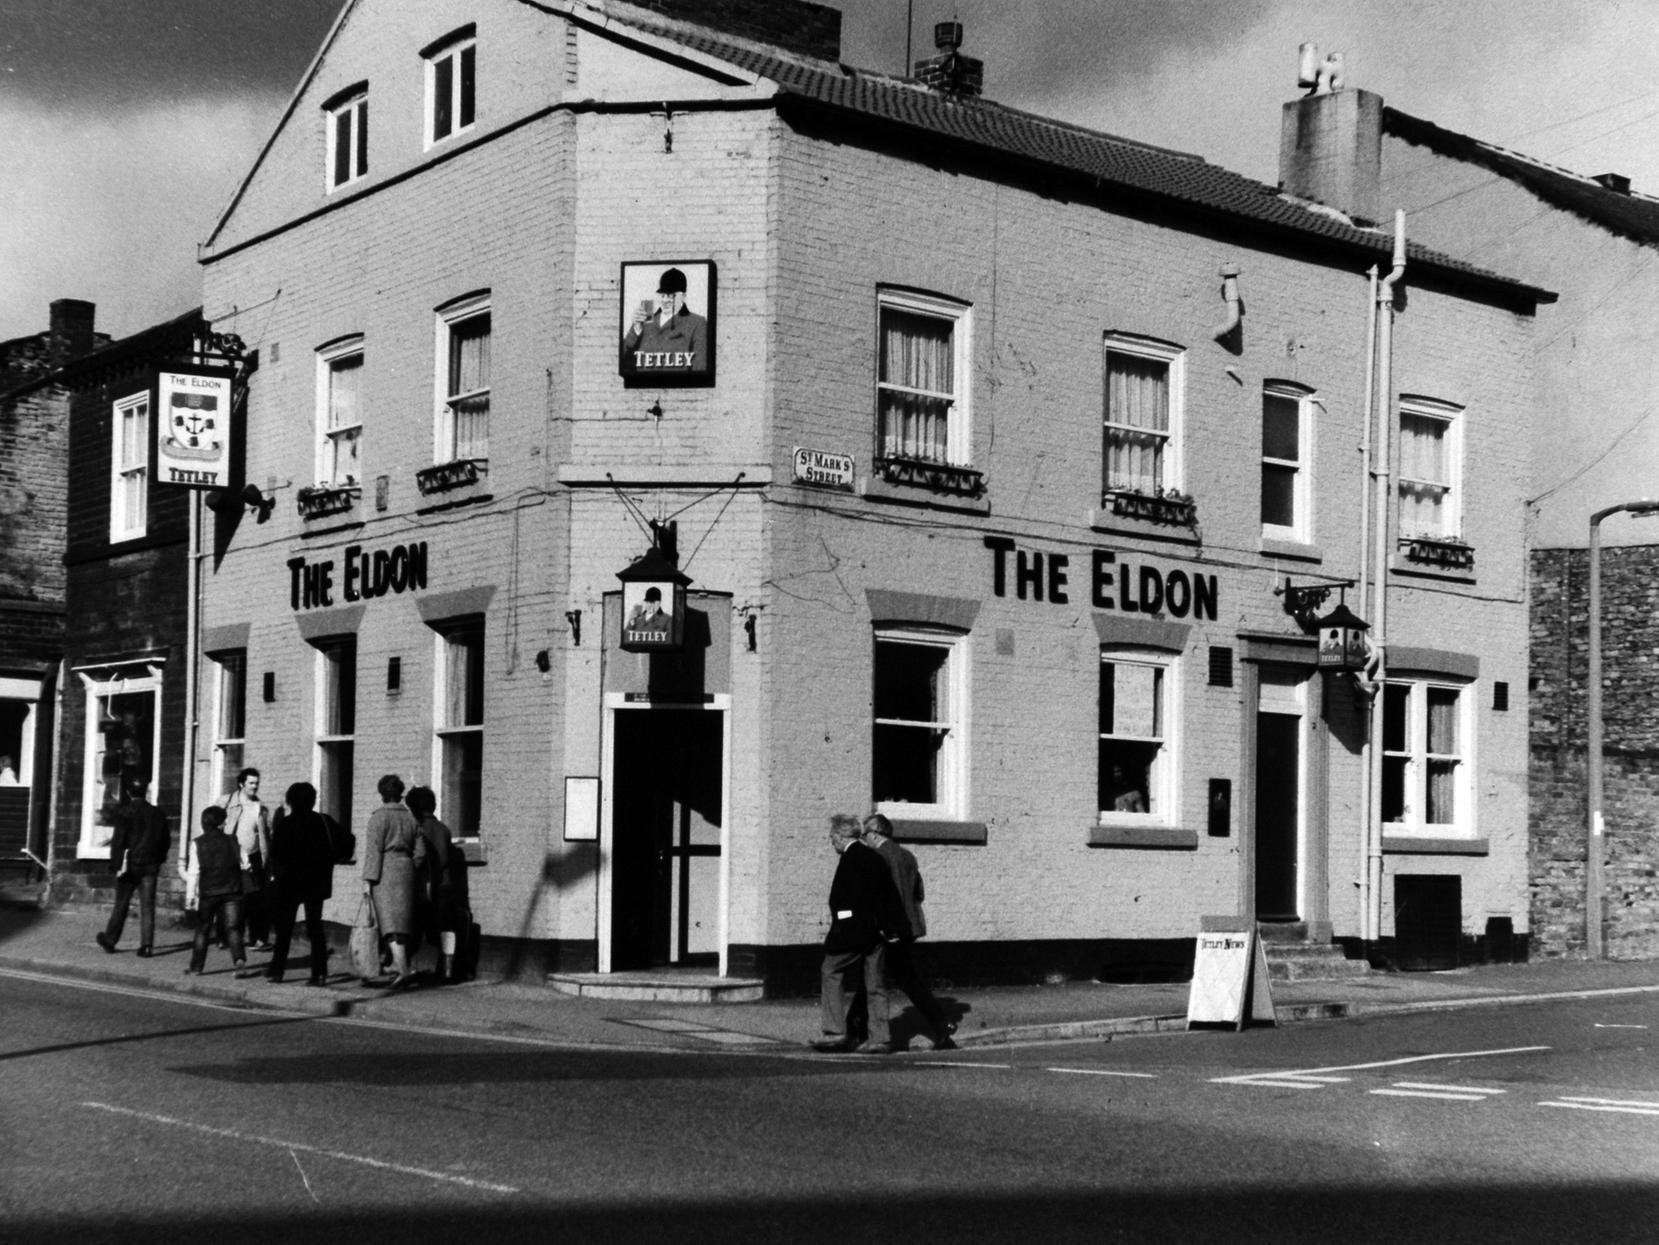 The Eldon pub on Woodhouse Lane was under the threat of demolition if proposals for improving the A660 corridor between Leeds University and Headingley received the green light.